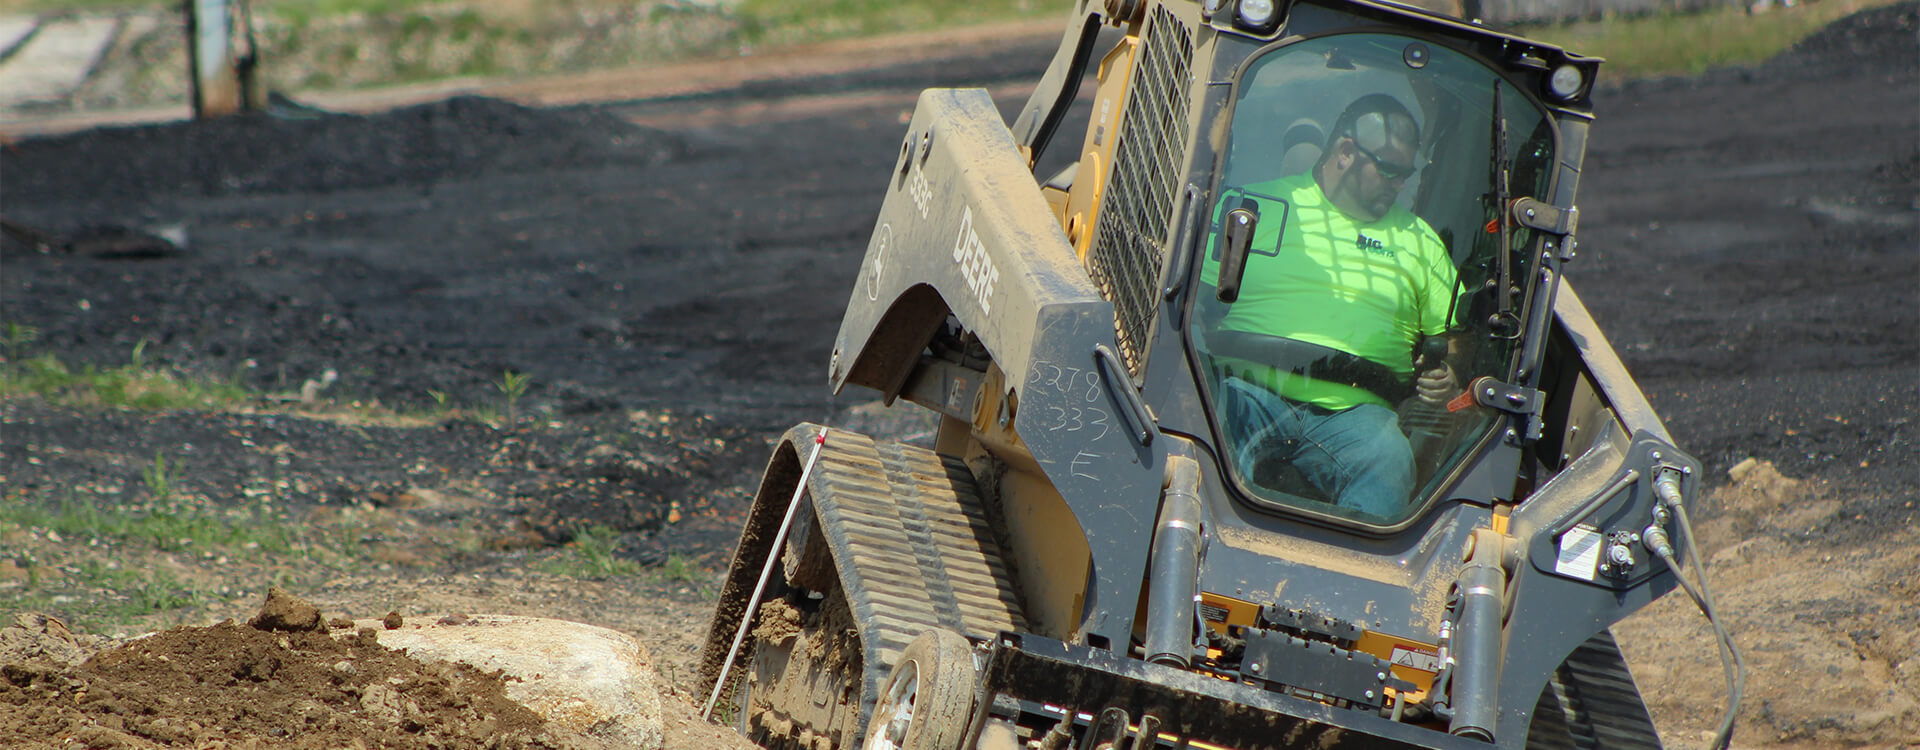 Big Greens land clearing professional using heavy equipment on a job in Ohio.